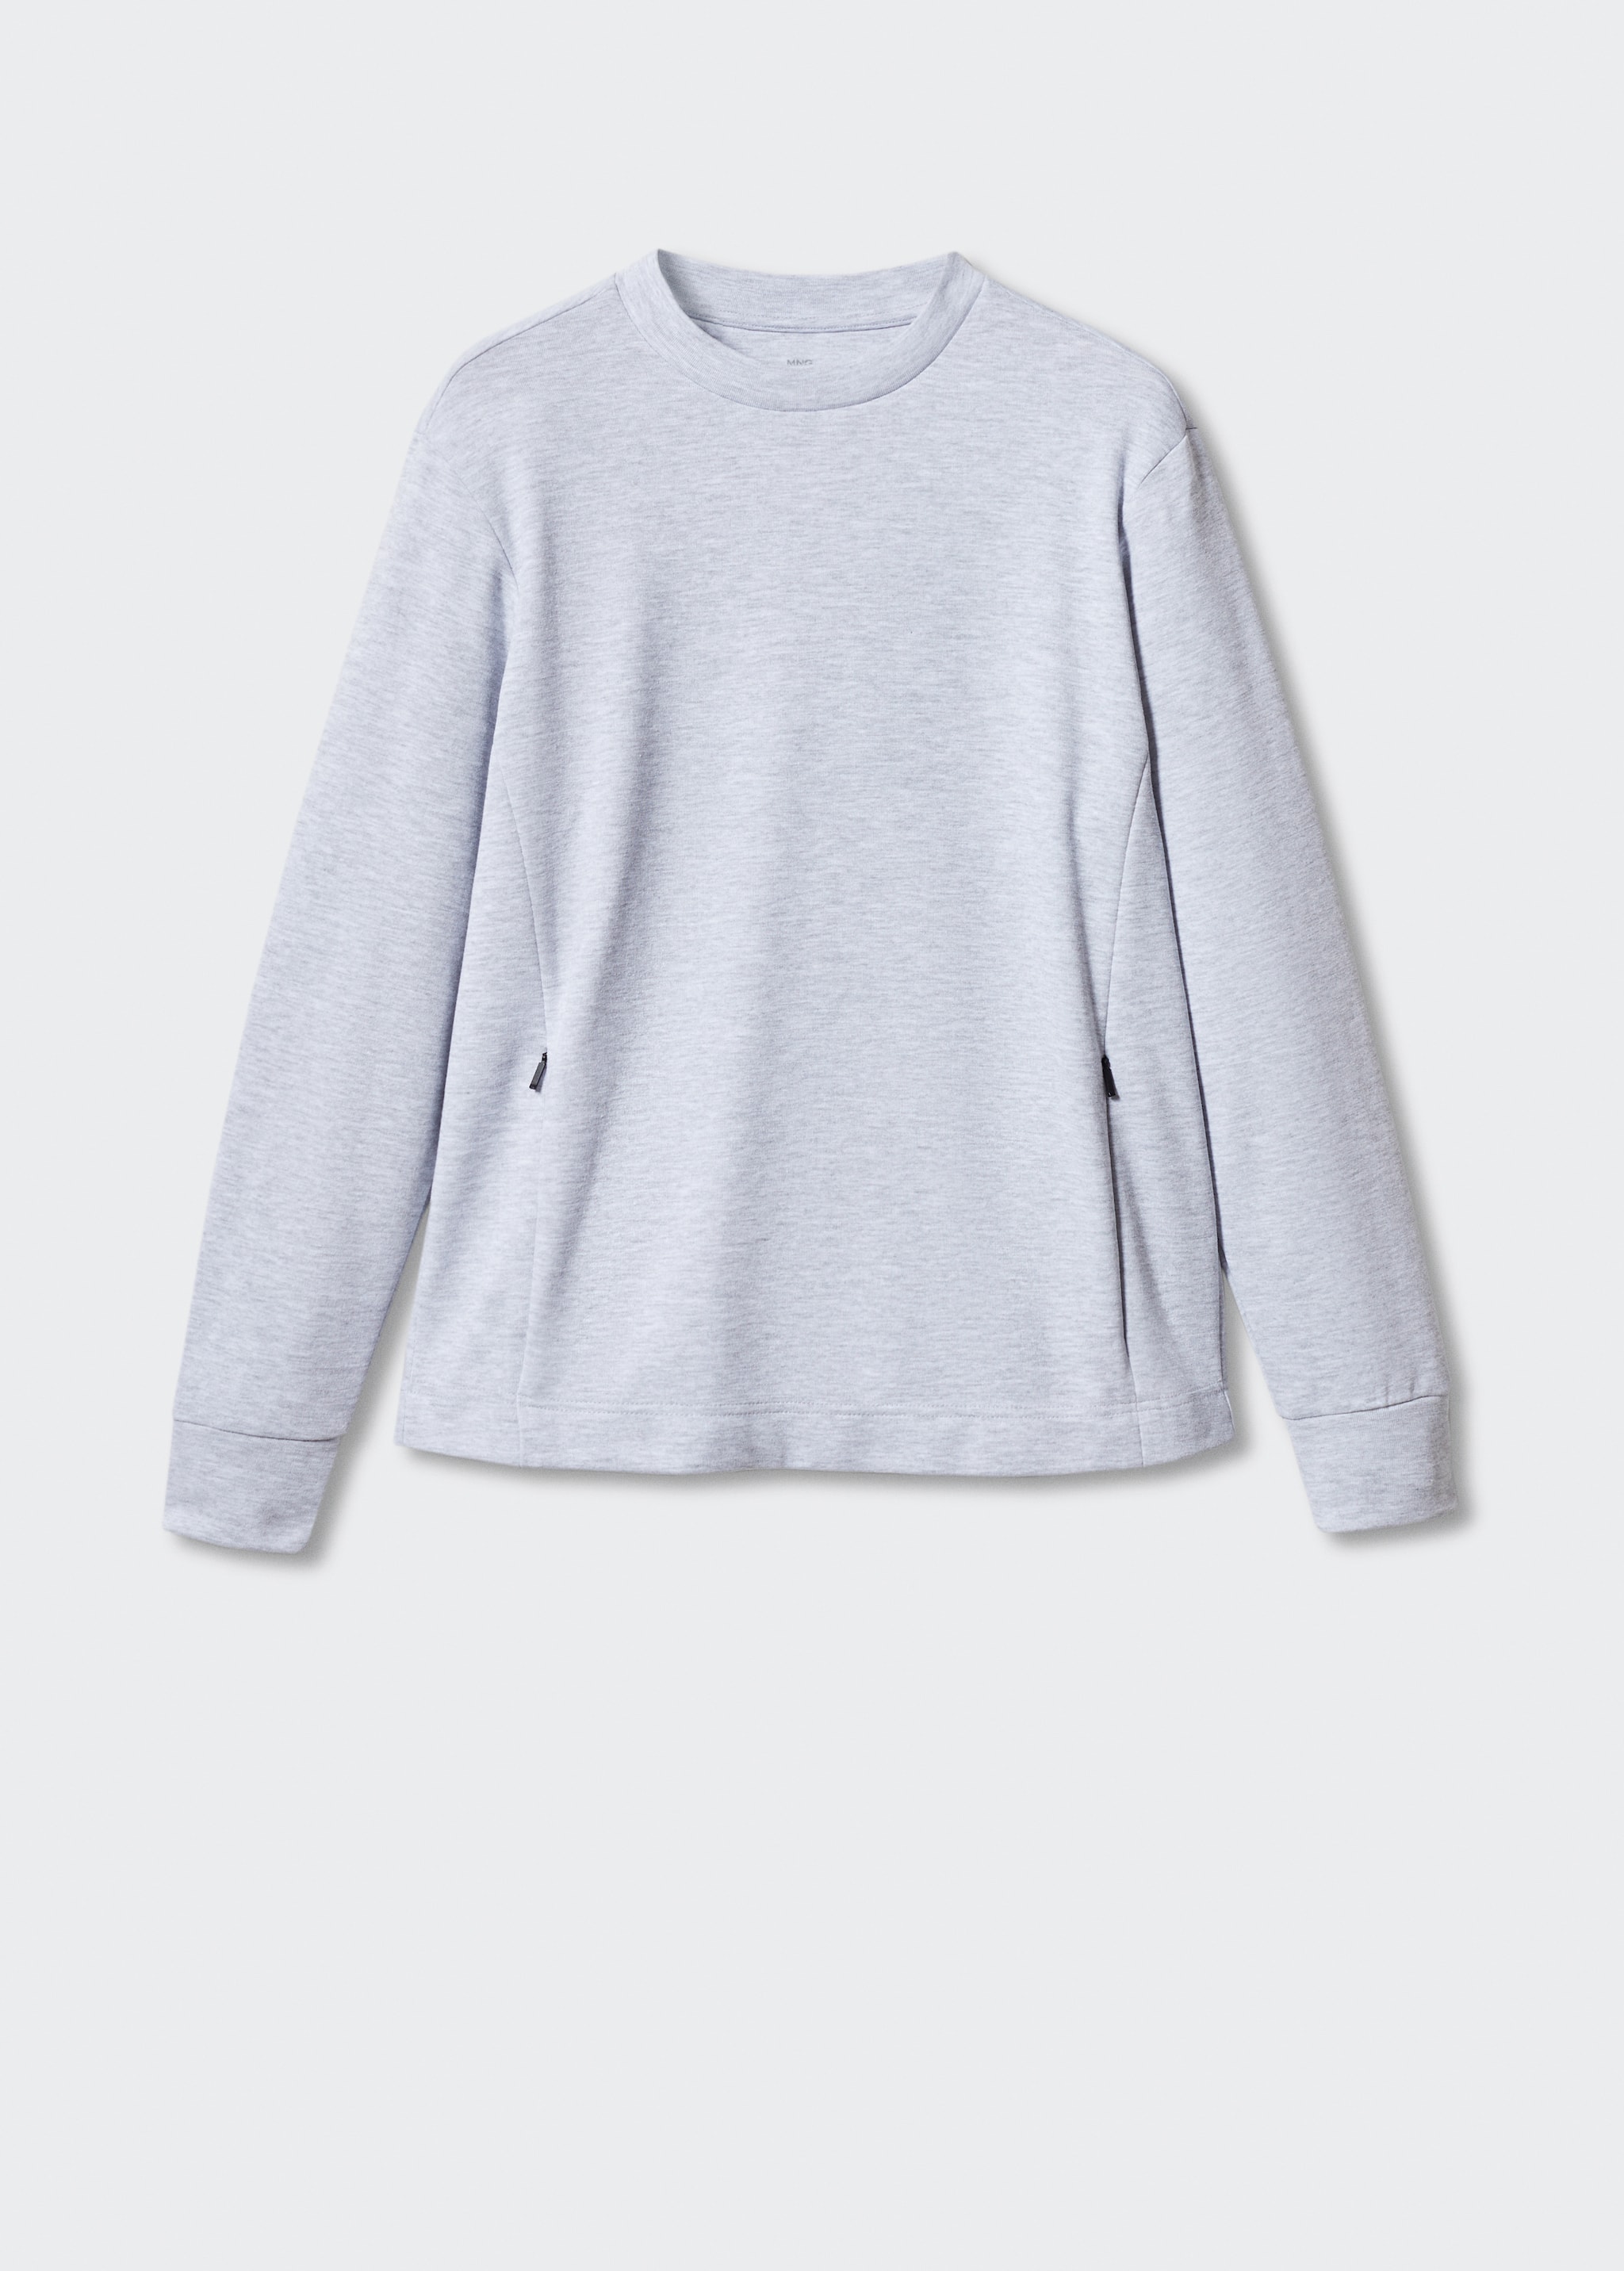 Breathable antibacterial sweatshirt - Article without model